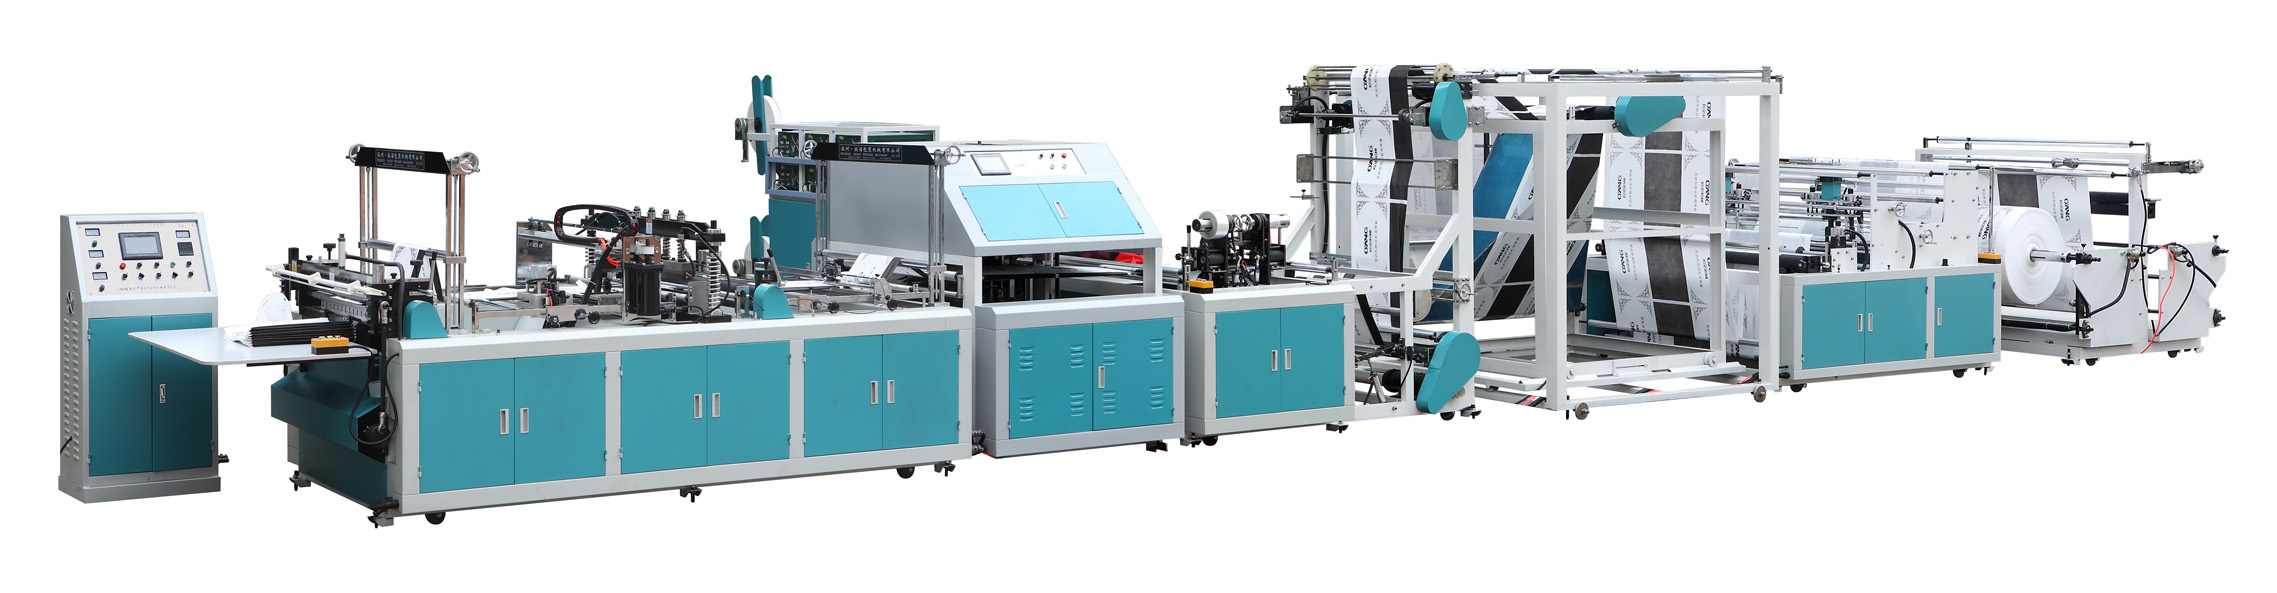 ZR-XA Non woven bag making machine with online handle attach